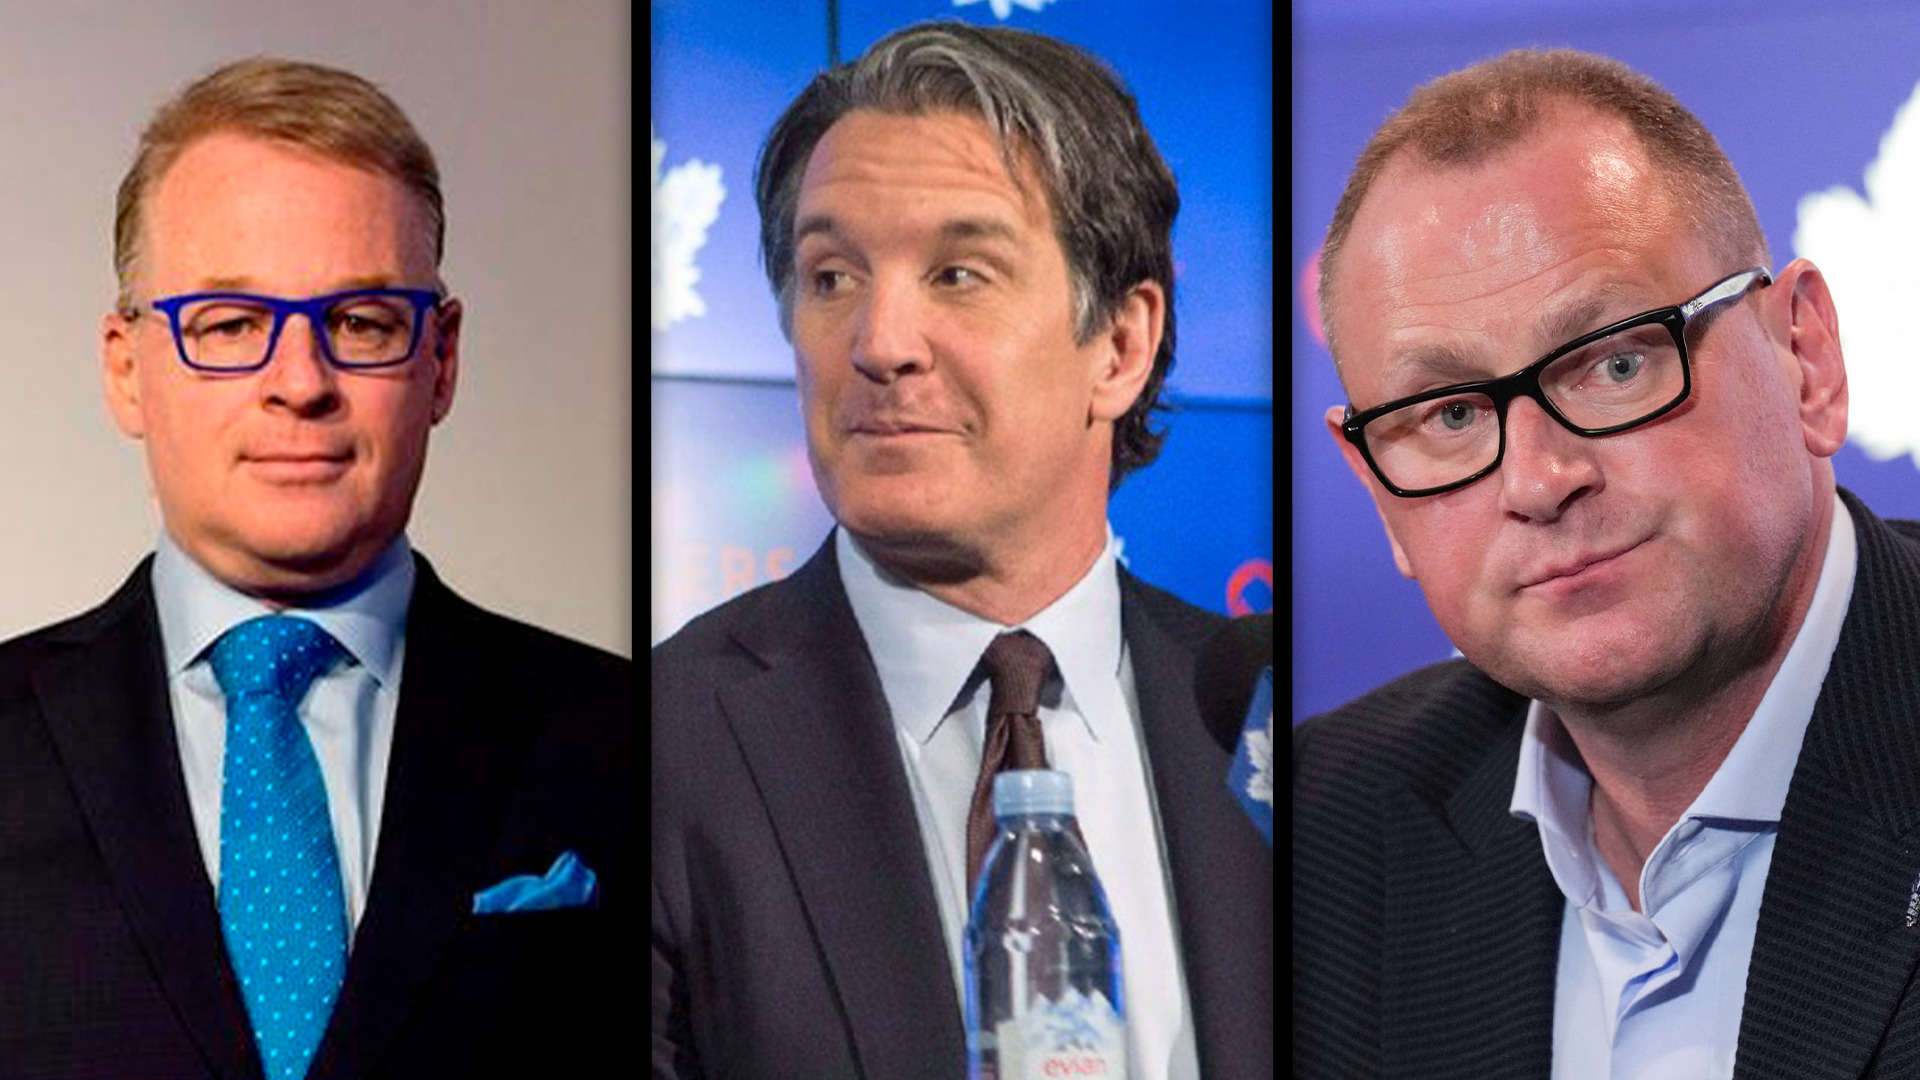 Leafs brass say good isn't good enough, the focus is on winning